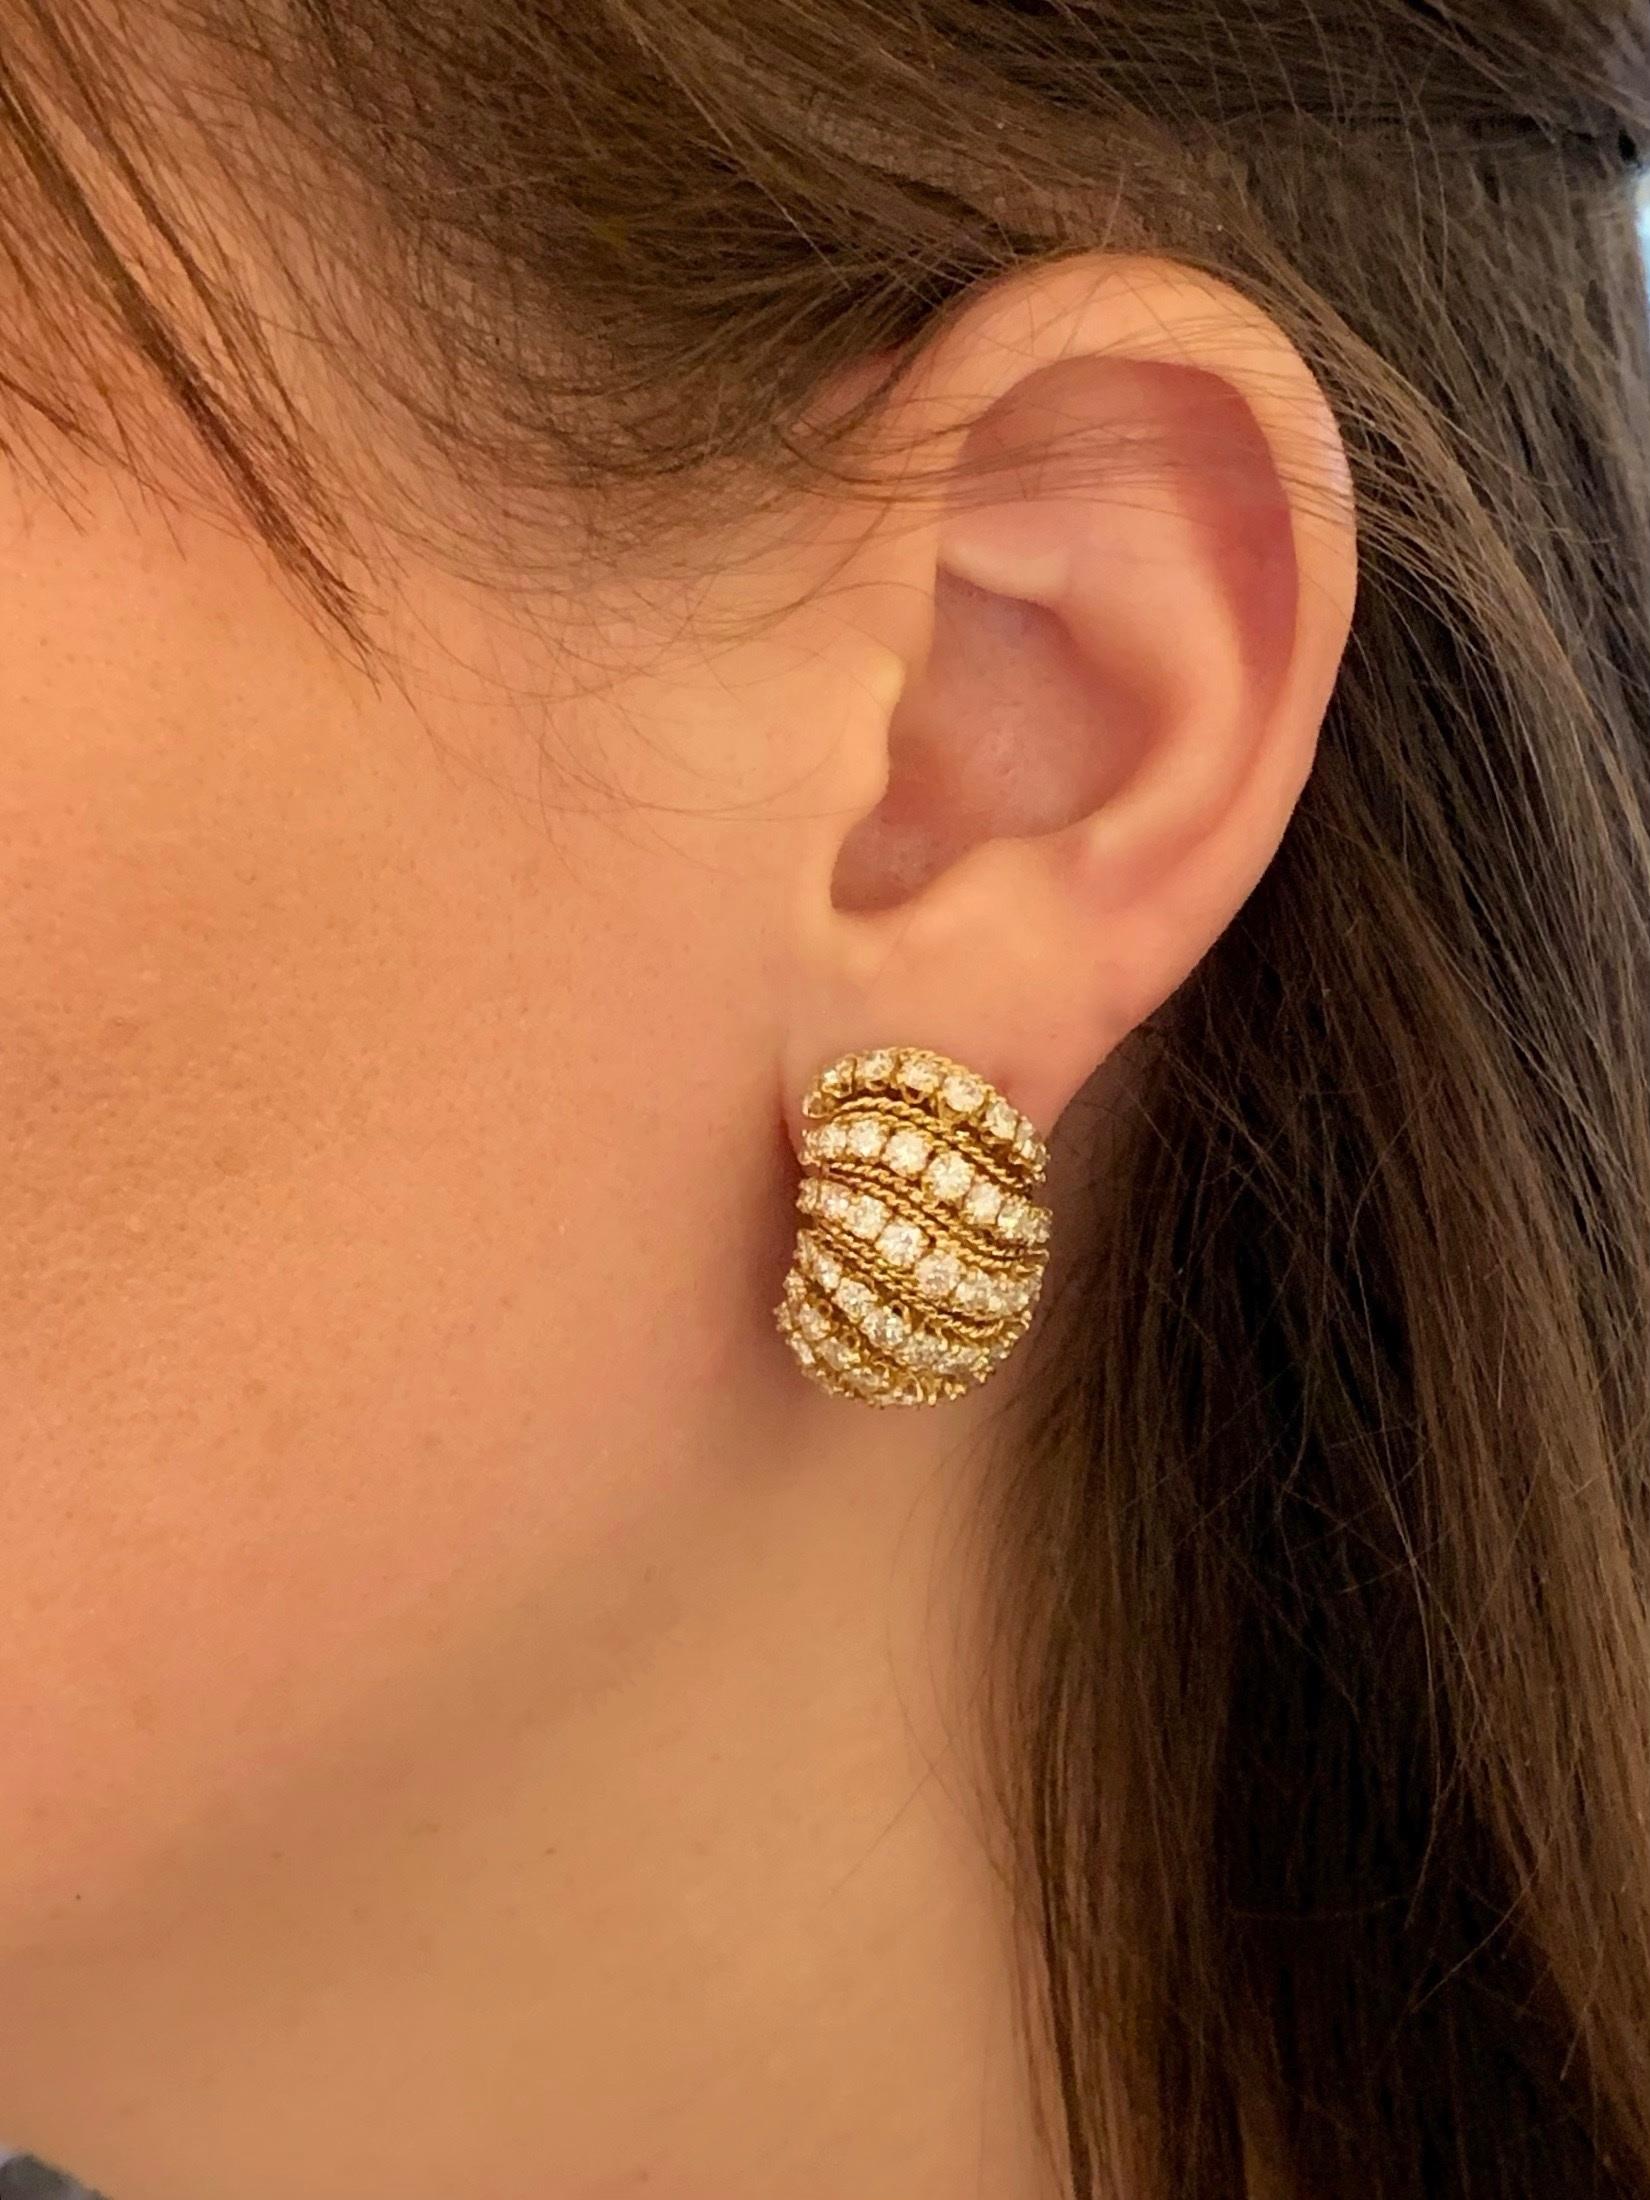 A pair of Mid-20th Century 18 karat gold earrings with diamonds by Van Cleef & Arpels. The earrings have 106 round-cut diamonds with an approximate total weight of 5.75 carats, F/G color, VS clarity. The earrings are designed in a bombé half-loop